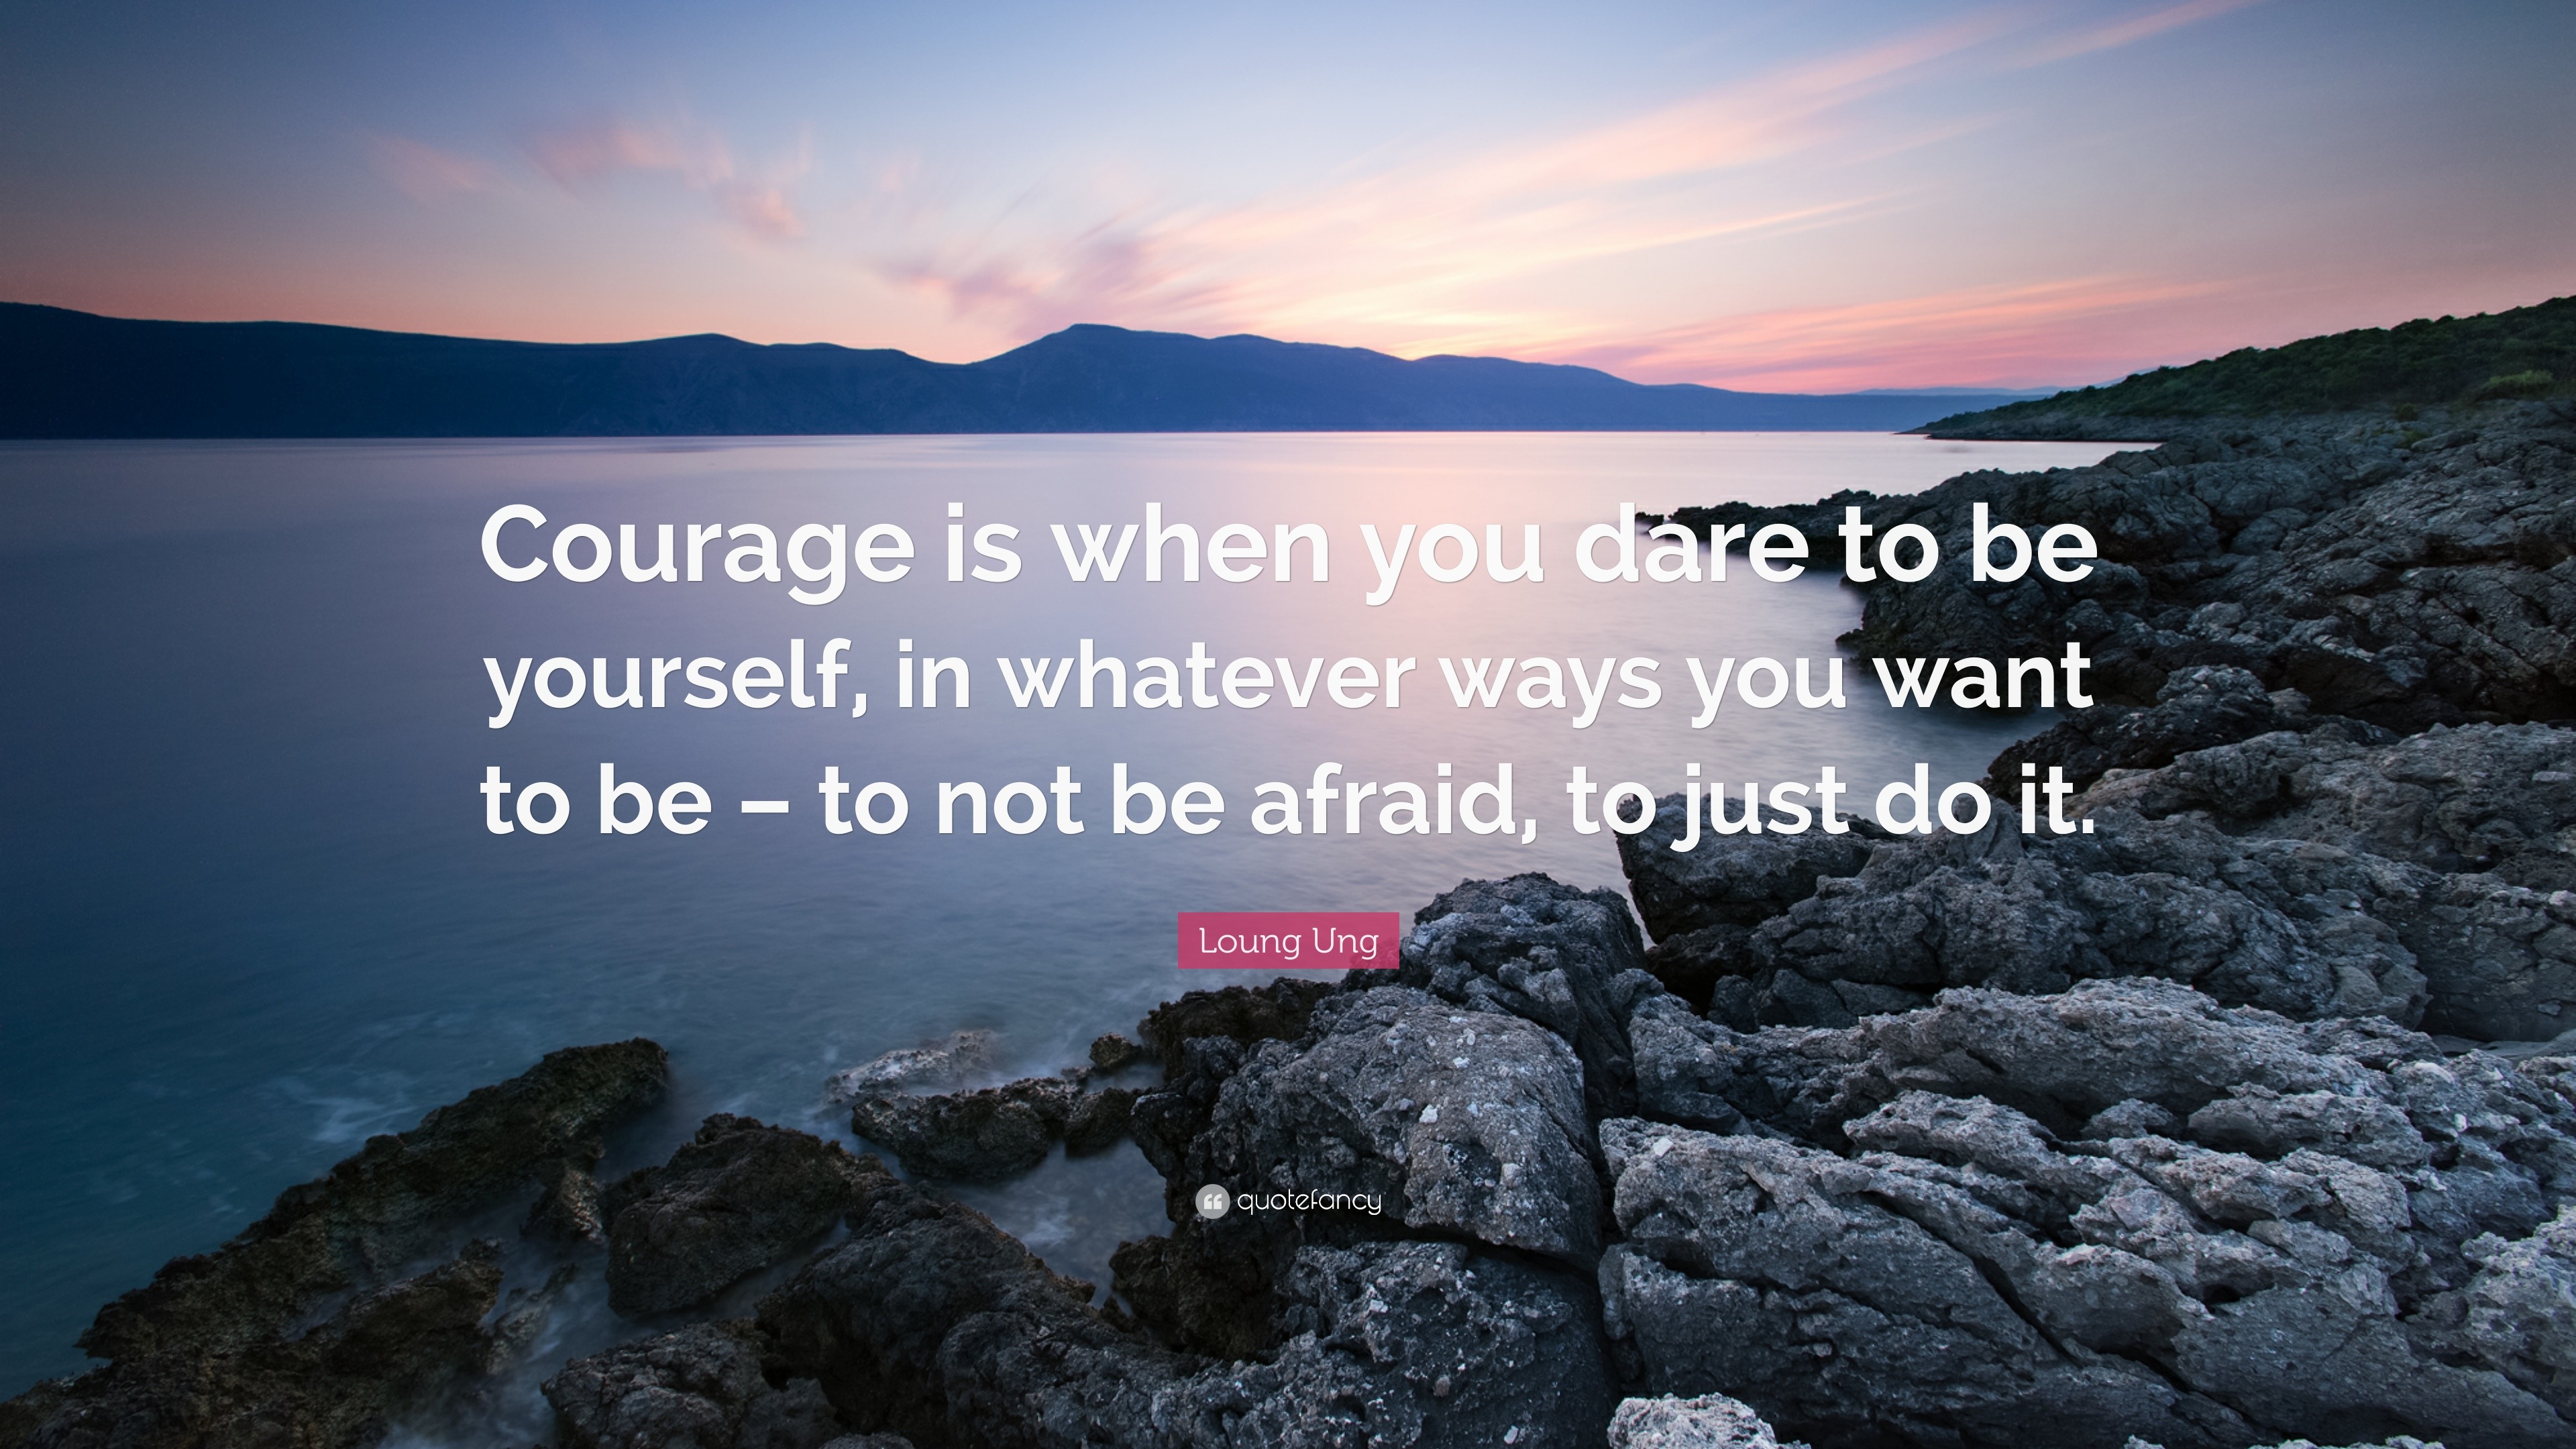 Loung Ung Quote: “Courage is when you dare to be yourself, in whatever ...